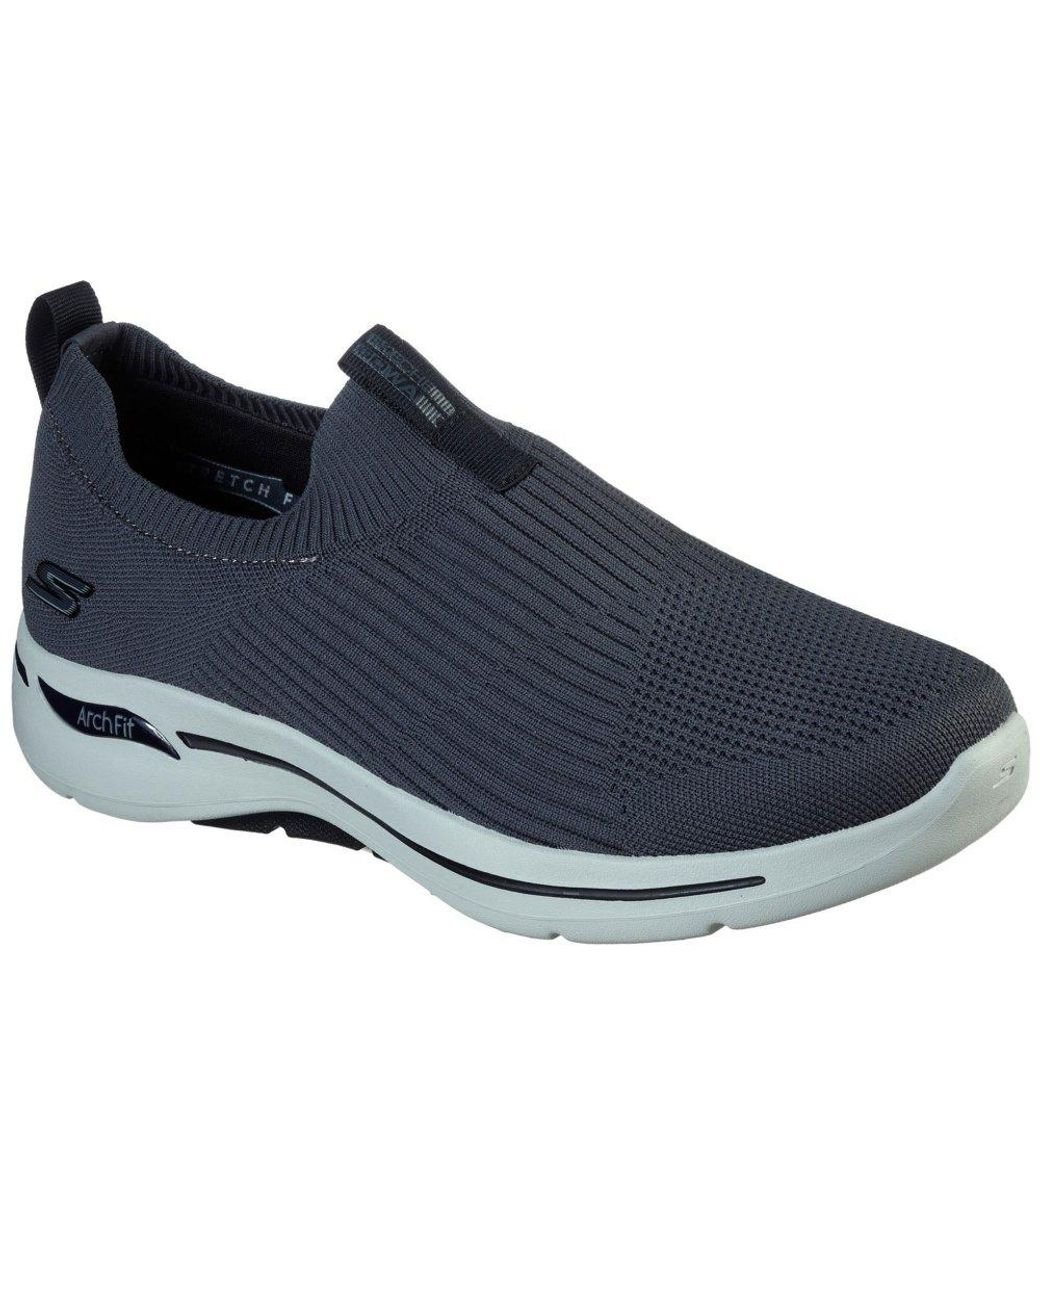 Skechers Go Walk Arch Fit Iconic Slip On Shoes in Black for Men | Lyst UK